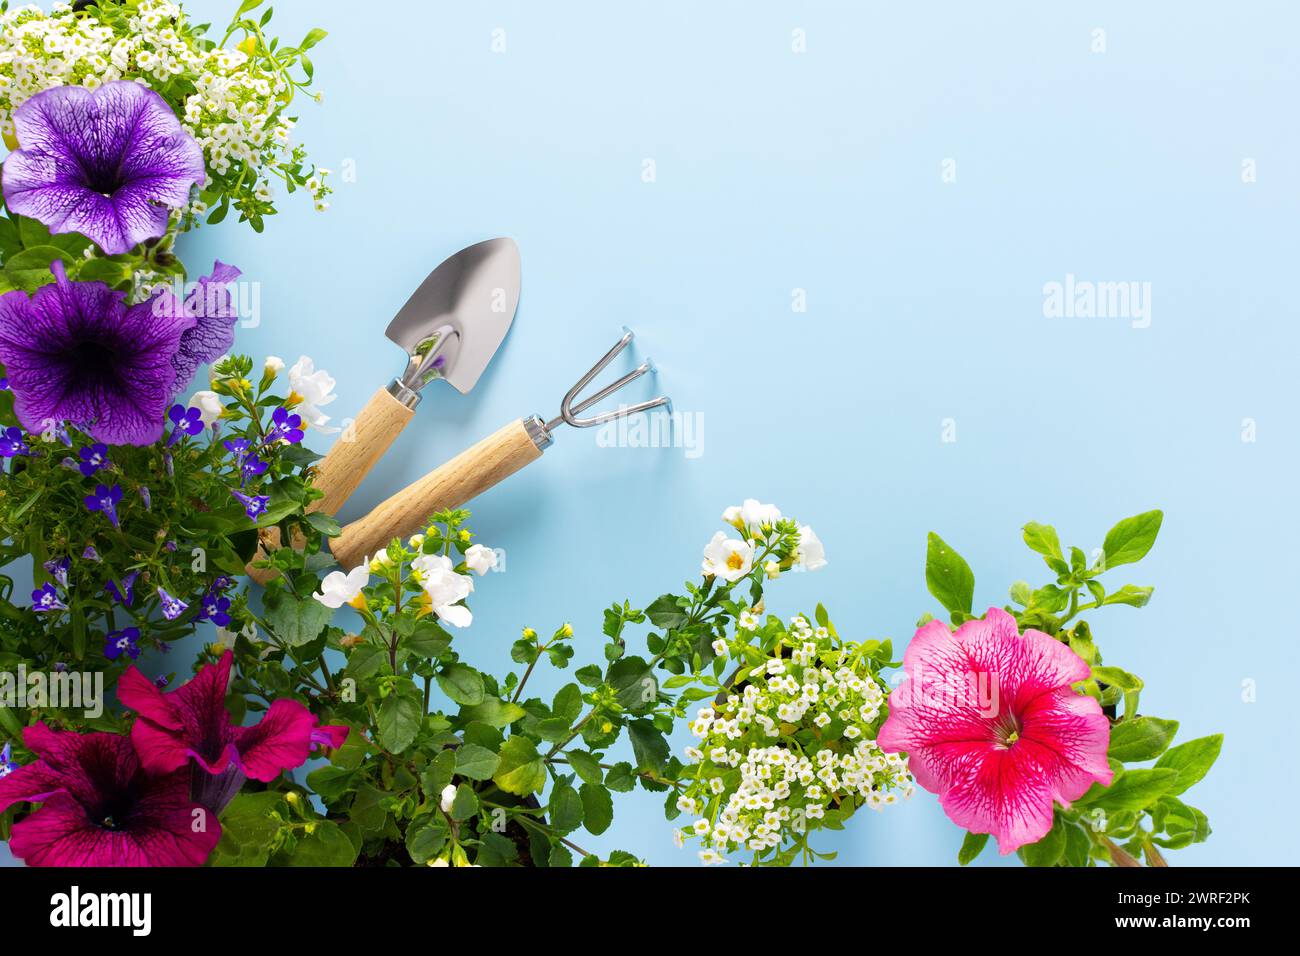 Spring decoration of a home balcony or terrace with flowers, Lobelia and Alyssum, Bacopa and Petunia on a blue background, home gardening and hobbies Stock Photo